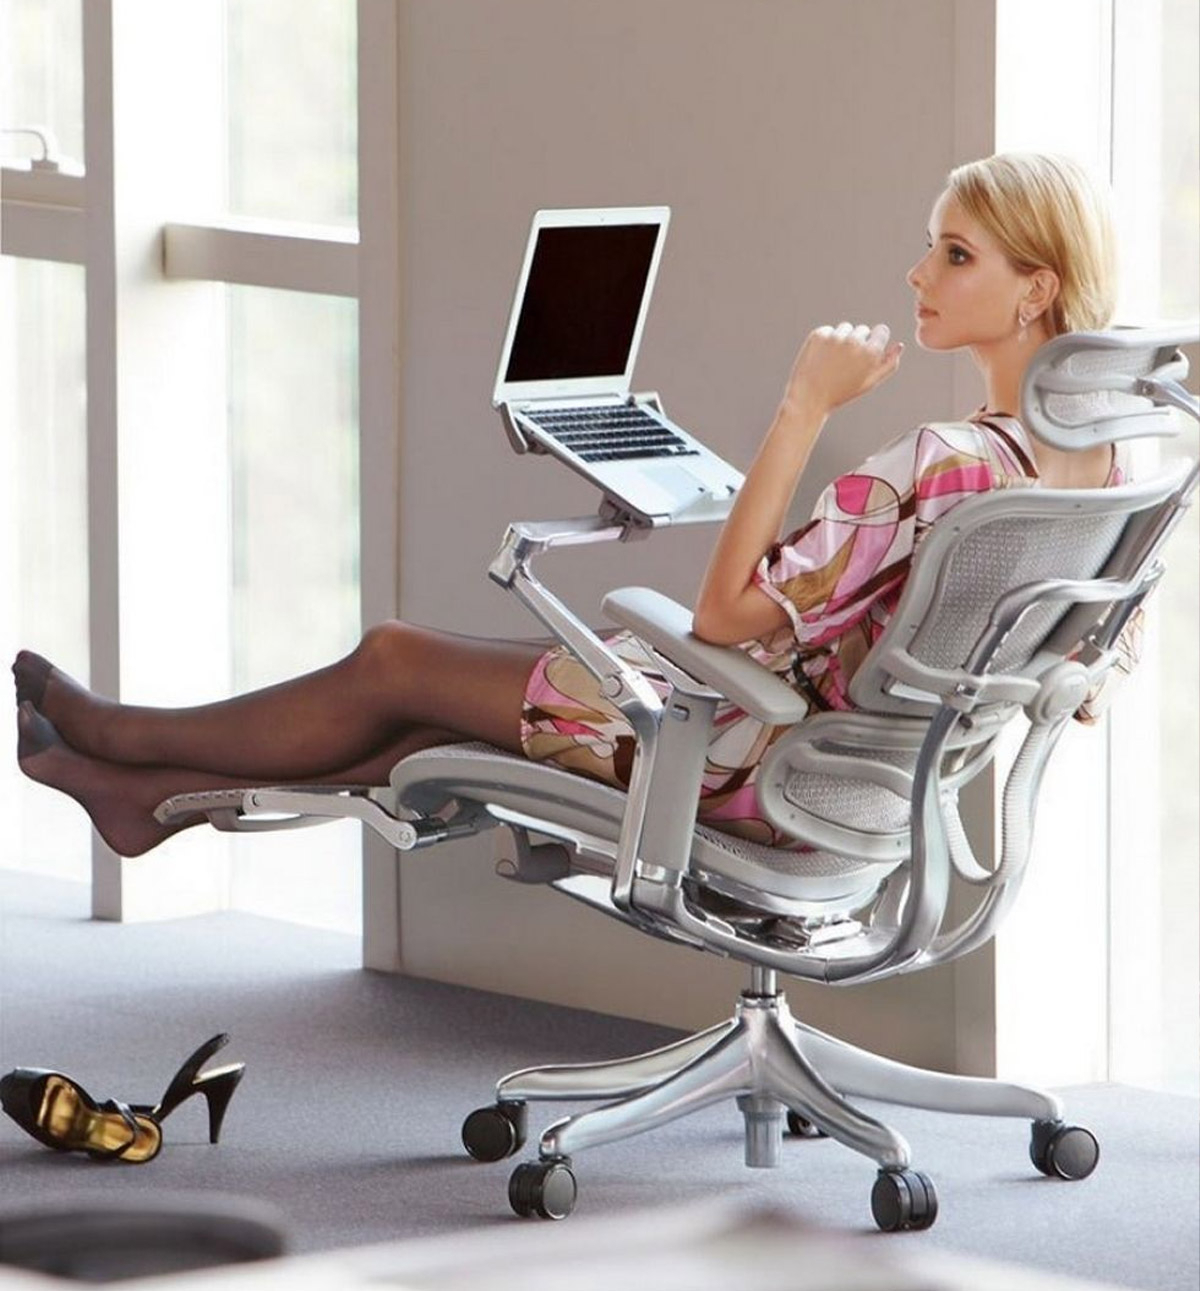 What are the best ergonomic recliner chairs for lower back issues